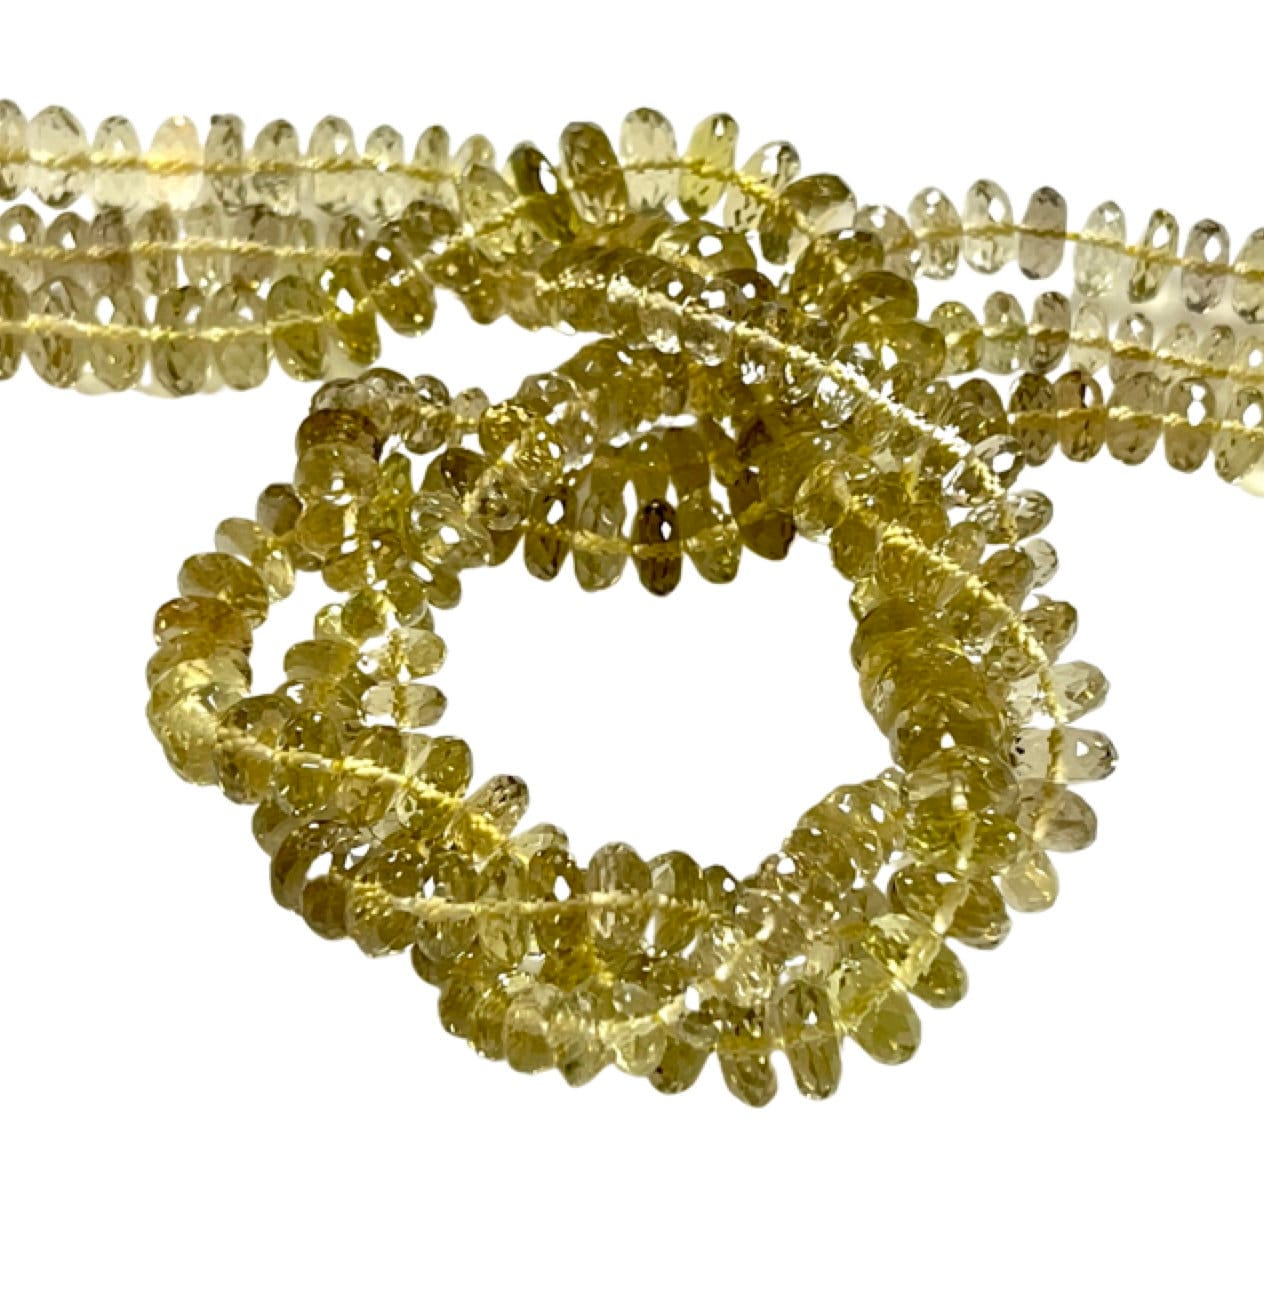 8mm Lemon Citrine Natural Gemstone Faceted Beads Strand, 15-16 Inch Long Healing Energy Gemstone Beads For Jewelry Making